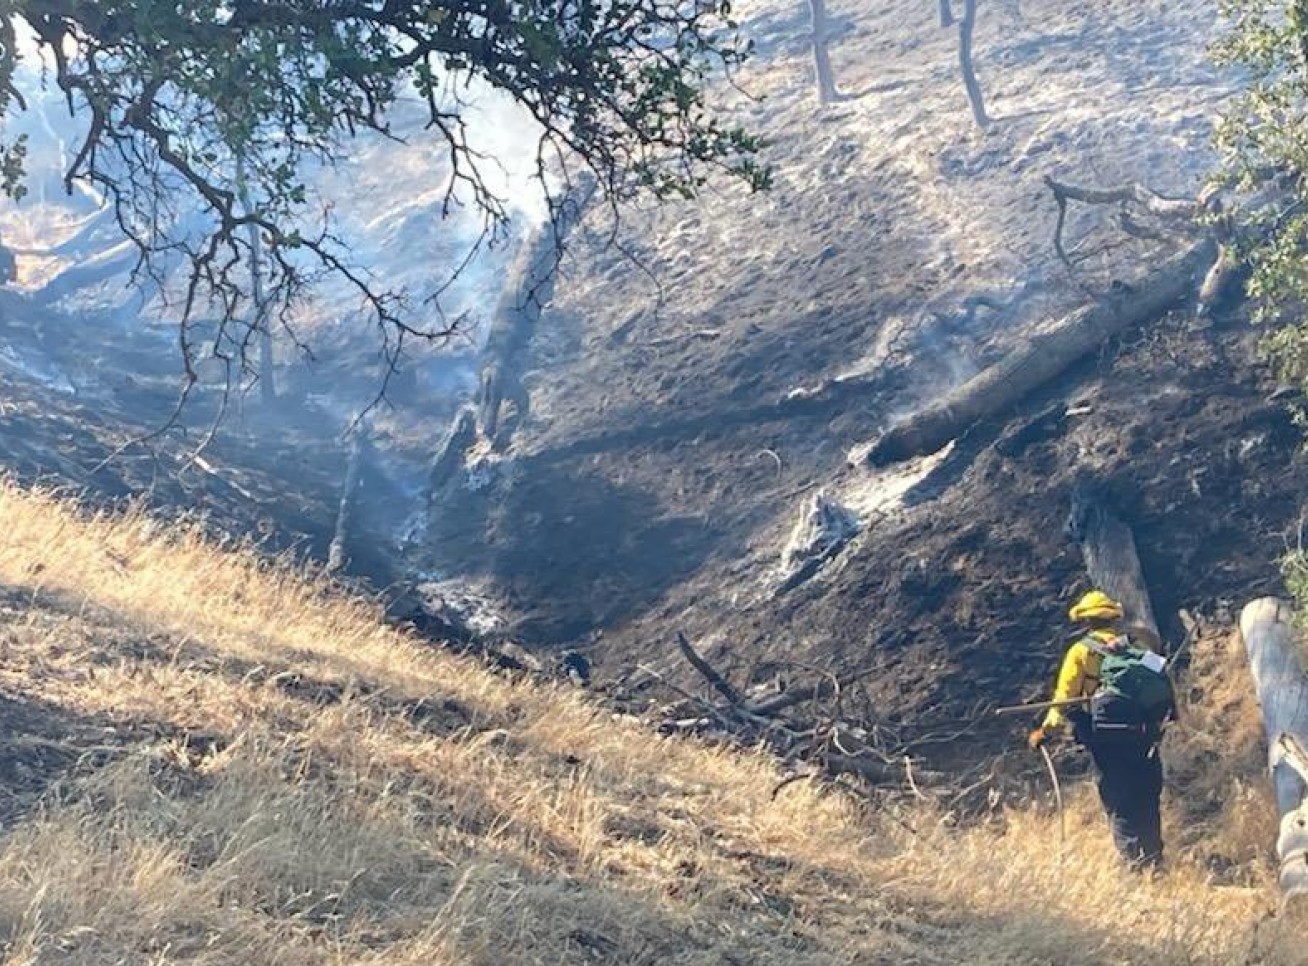 Firefighter in protective clothing treads through a burnt forest